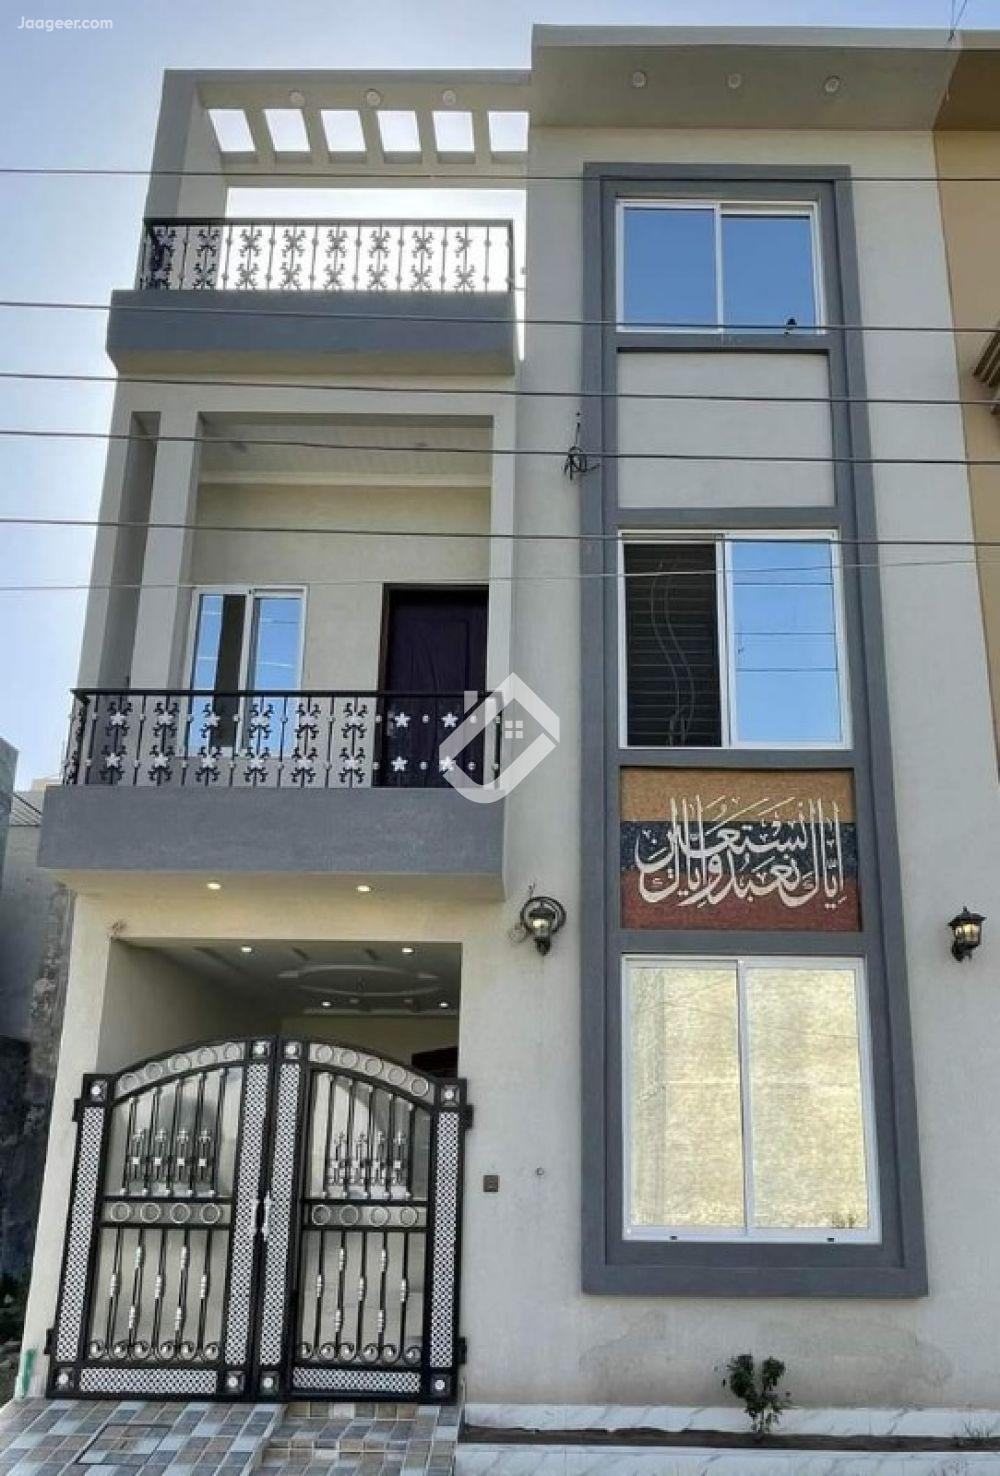 View  3 Marla Double Storey House For Sale In Pak-Arab Housing Scheme in Pak-Arab Housing Scheme, Lahore